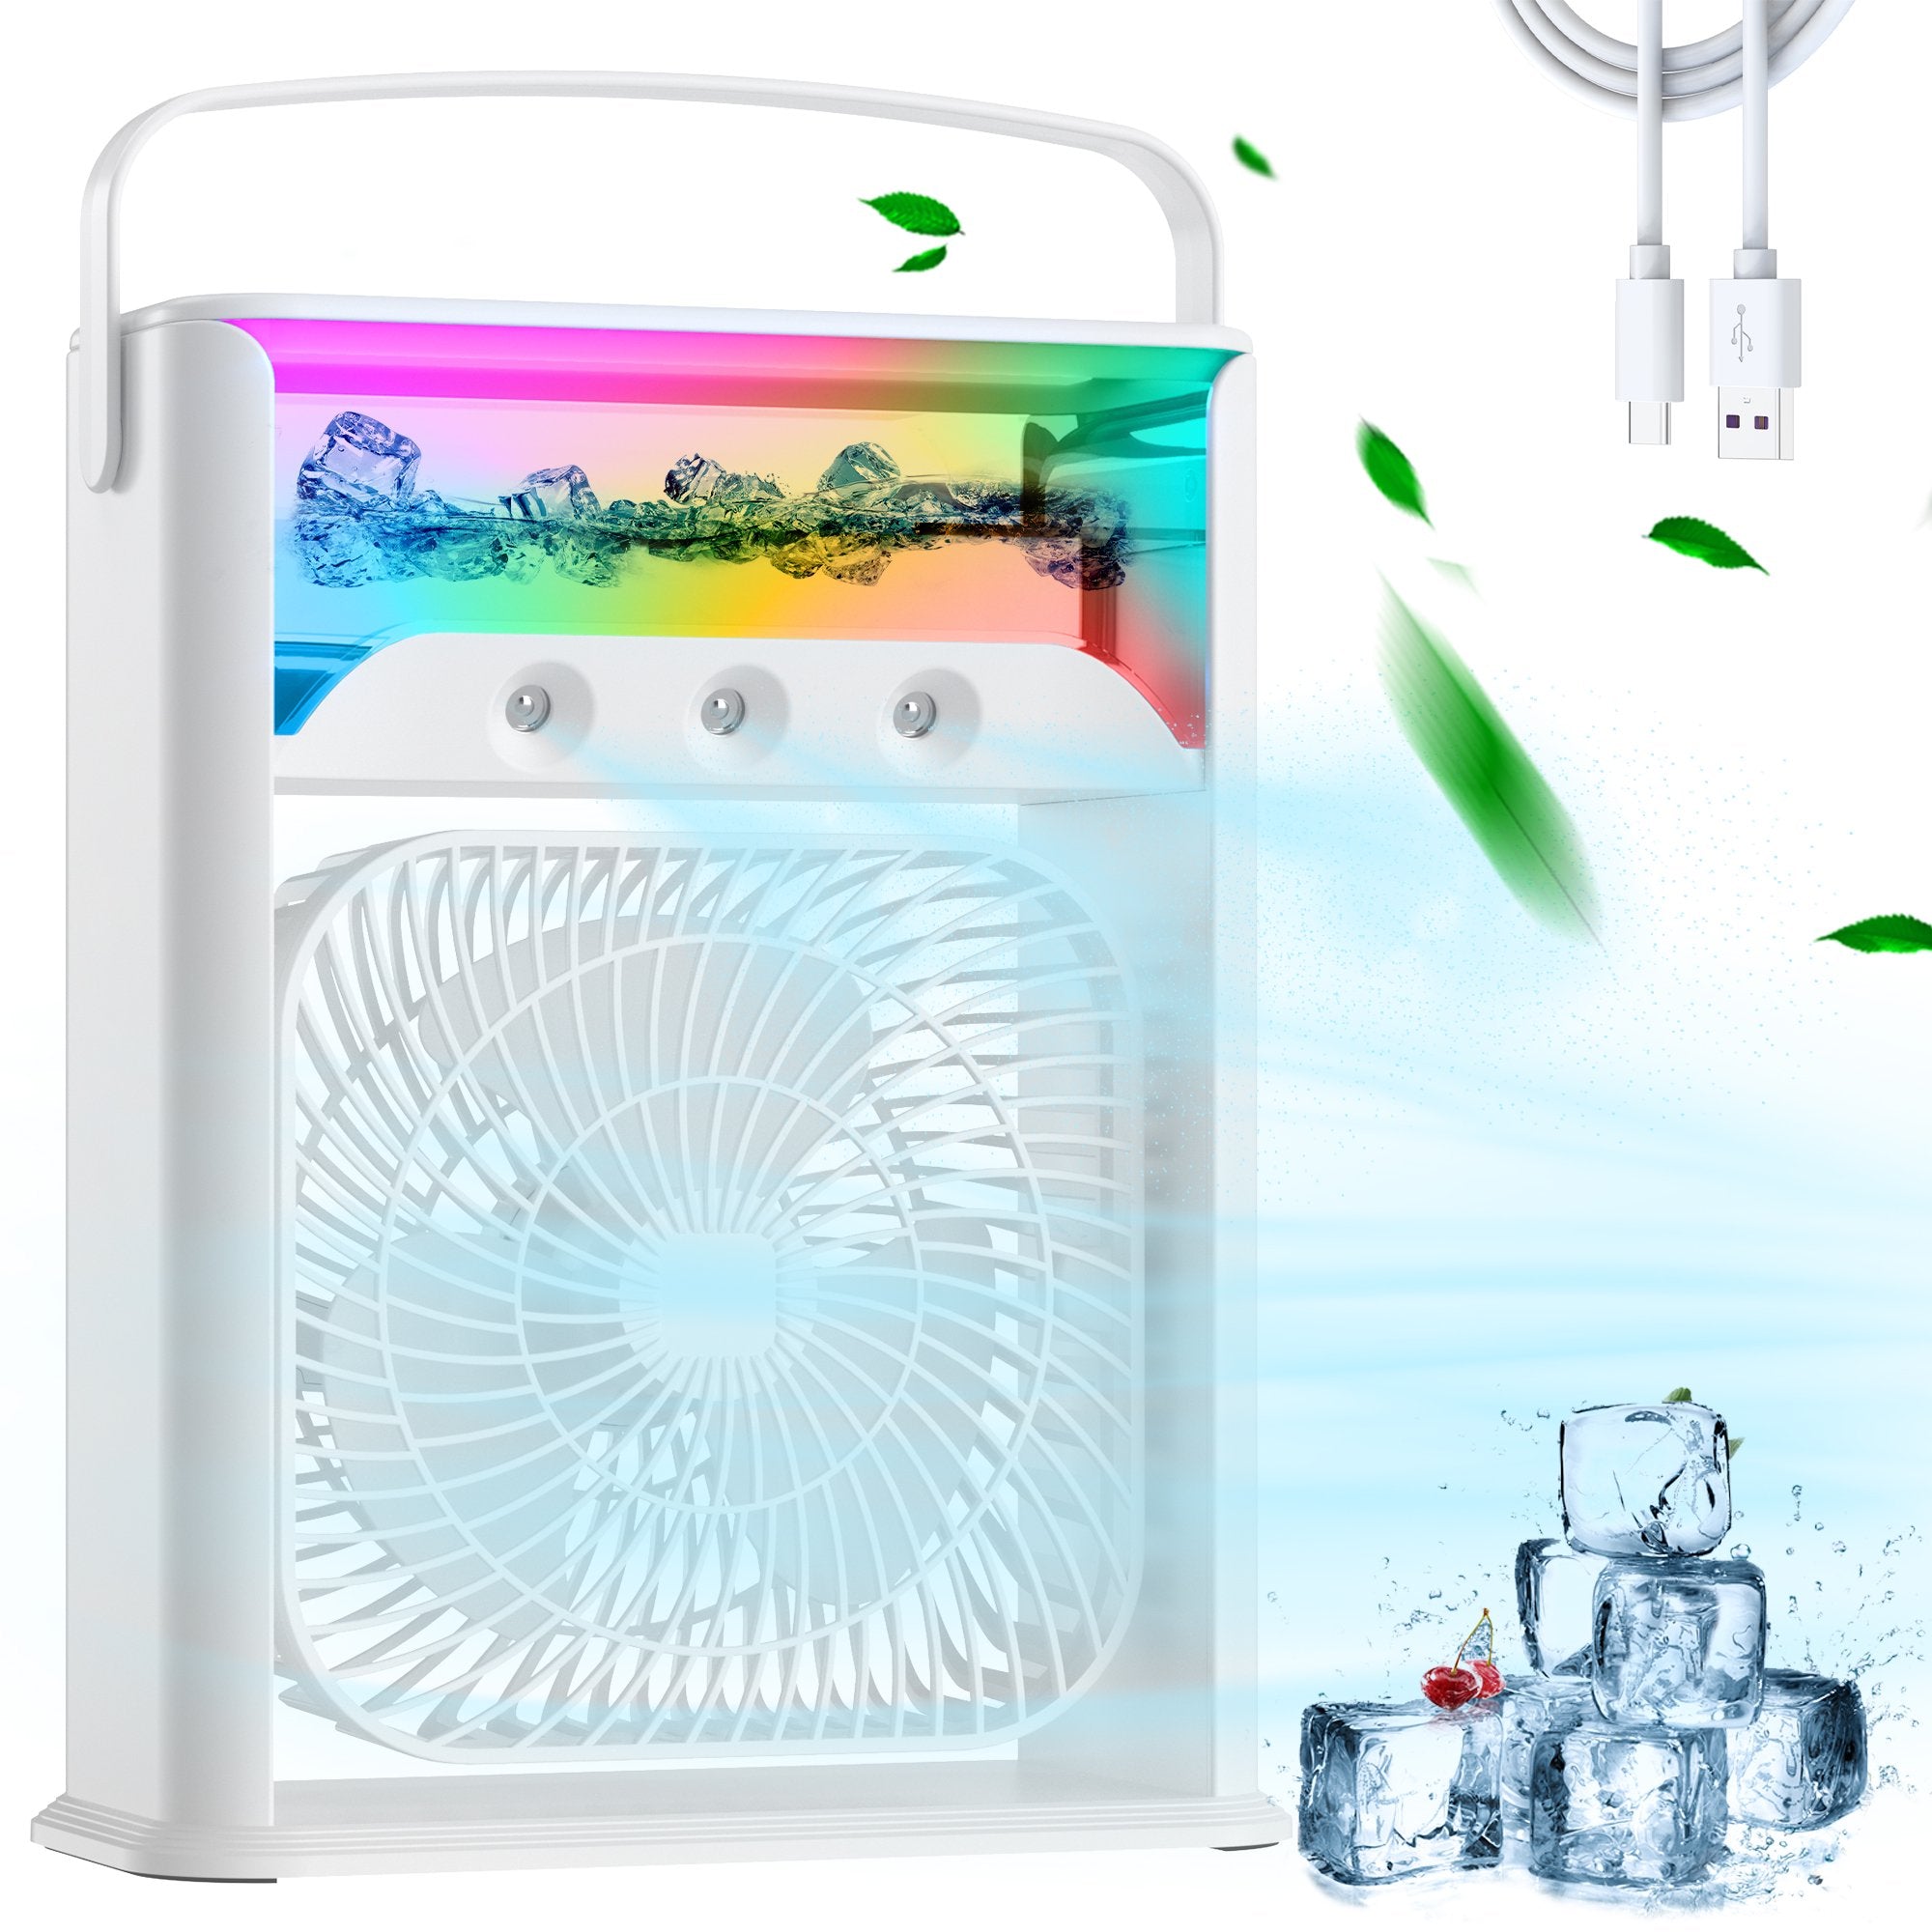 Mini Air Conditioner Fan,Portable Small Air Conditioner,Air Humidifier,Evaporative Air Cooler with 3 Wind Speeds,Misting Personal Portable Air Cooler,Small Desktop Cooling Fan for Home Office Outdoor